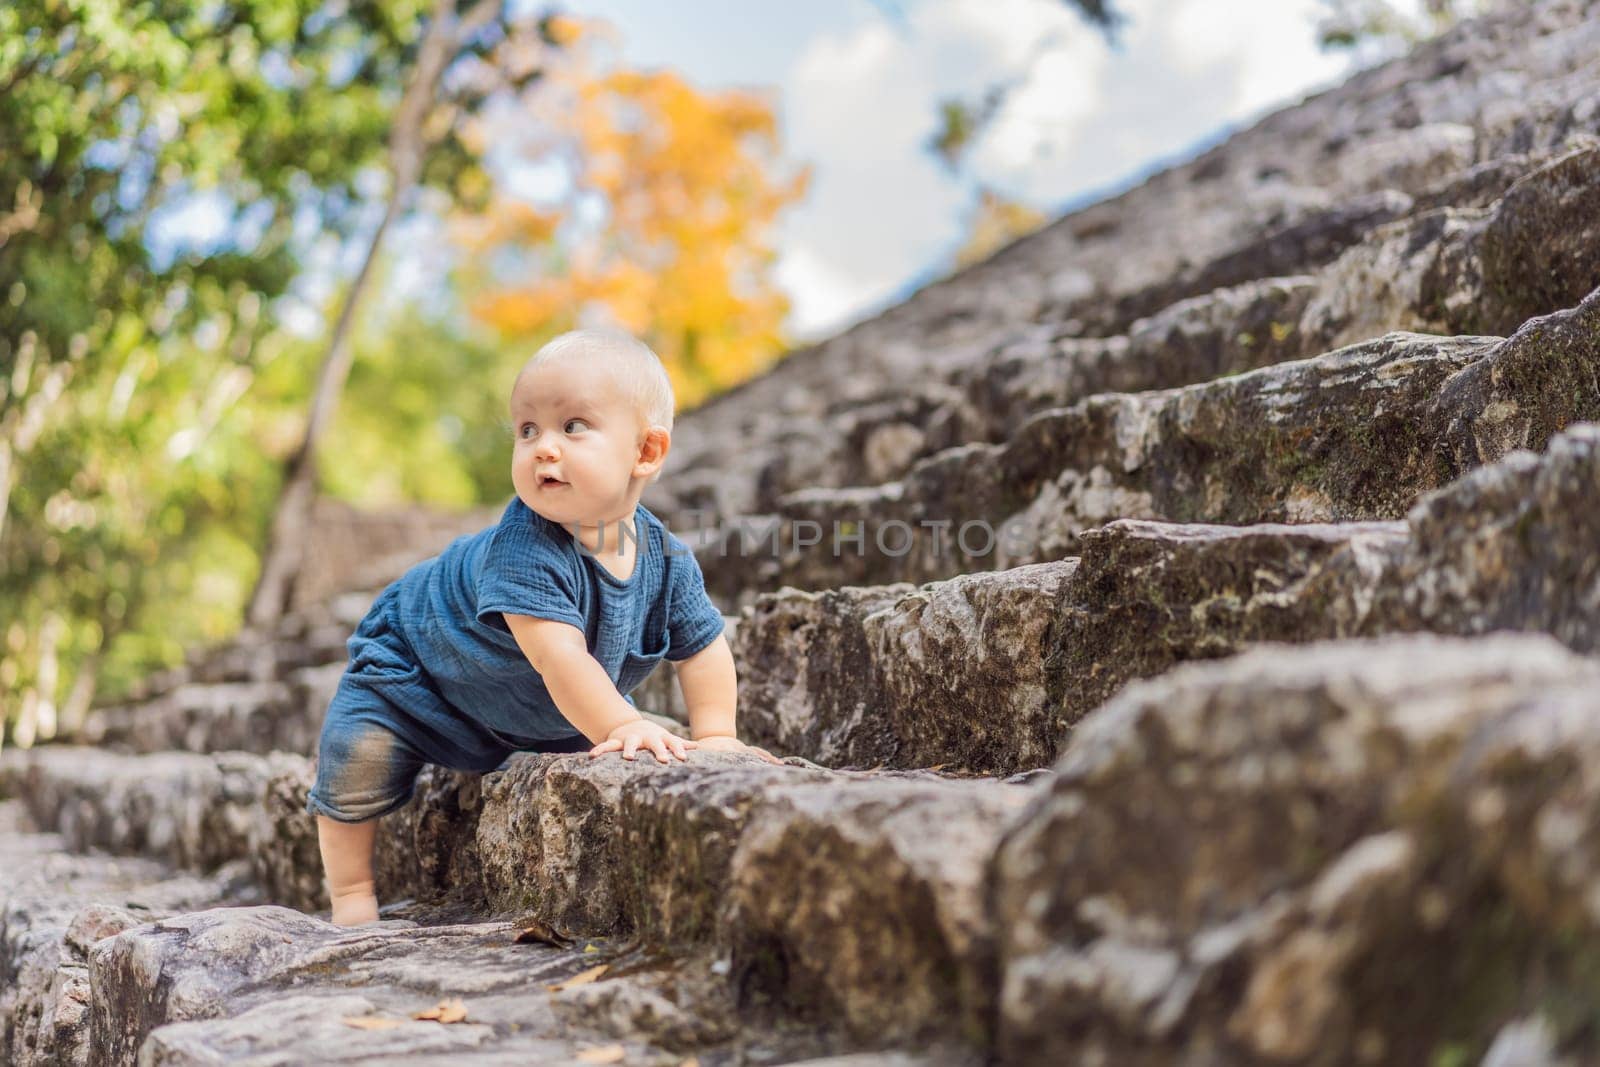 Baby tourist at Coba, Mexico. Ancient mayan city in Mexico. Coba is an archaeological area and a famous landmark of Yucatan Peninsula. Cloudy sky over a pyramid in Mexico by galitskaya